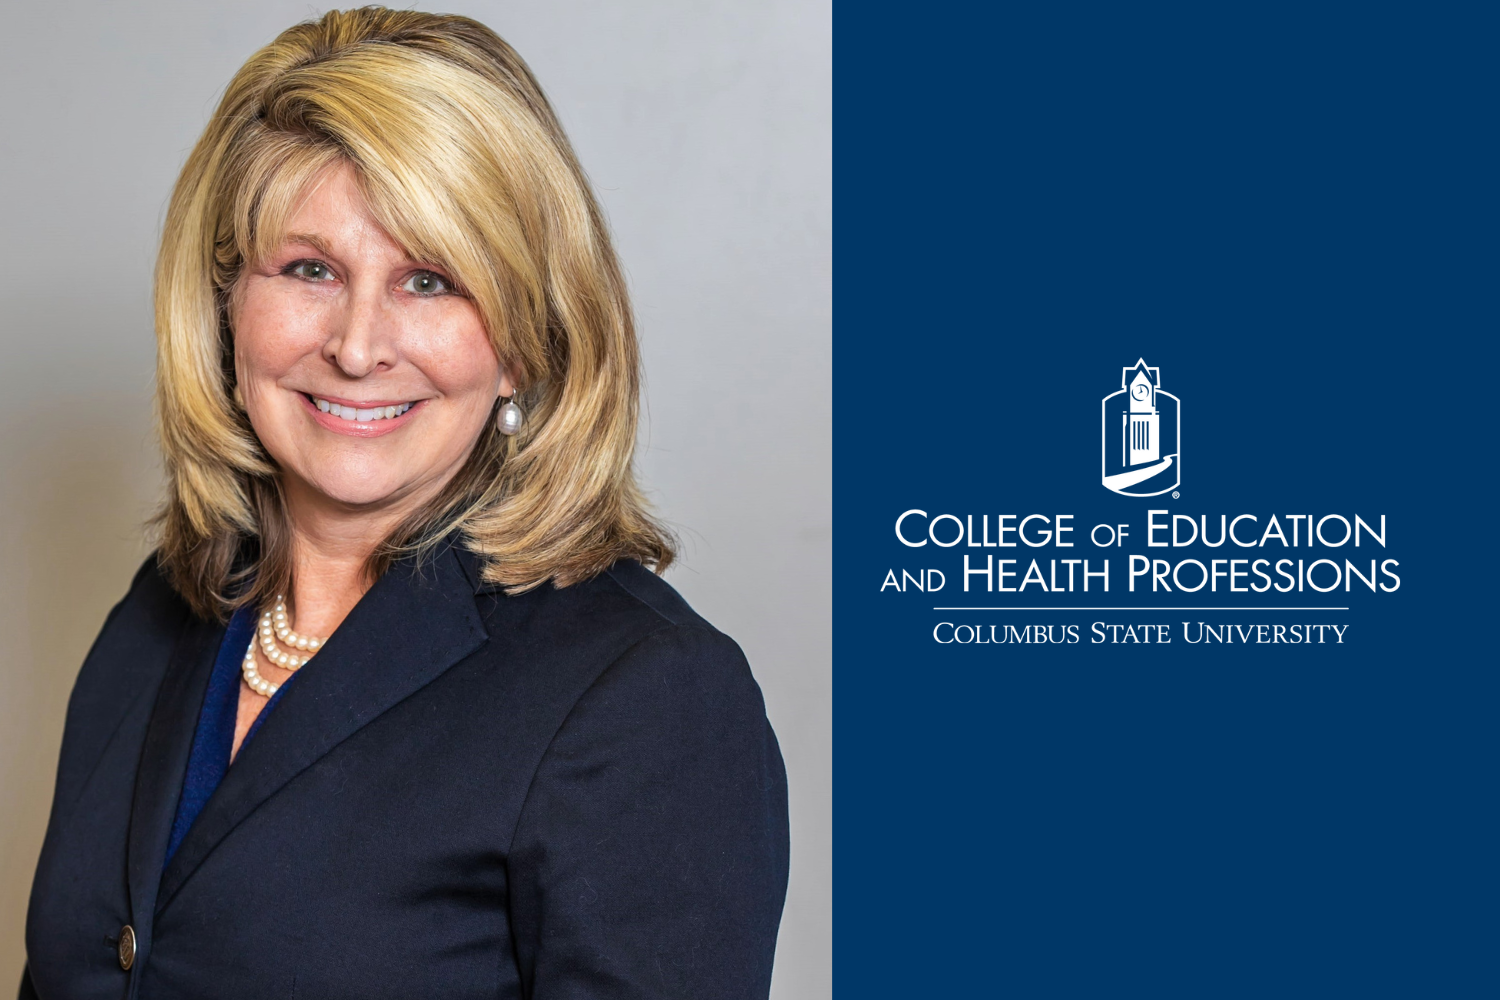 Headshot of Margie Yates on the left, with the College of Education and Health Professions logo on the right